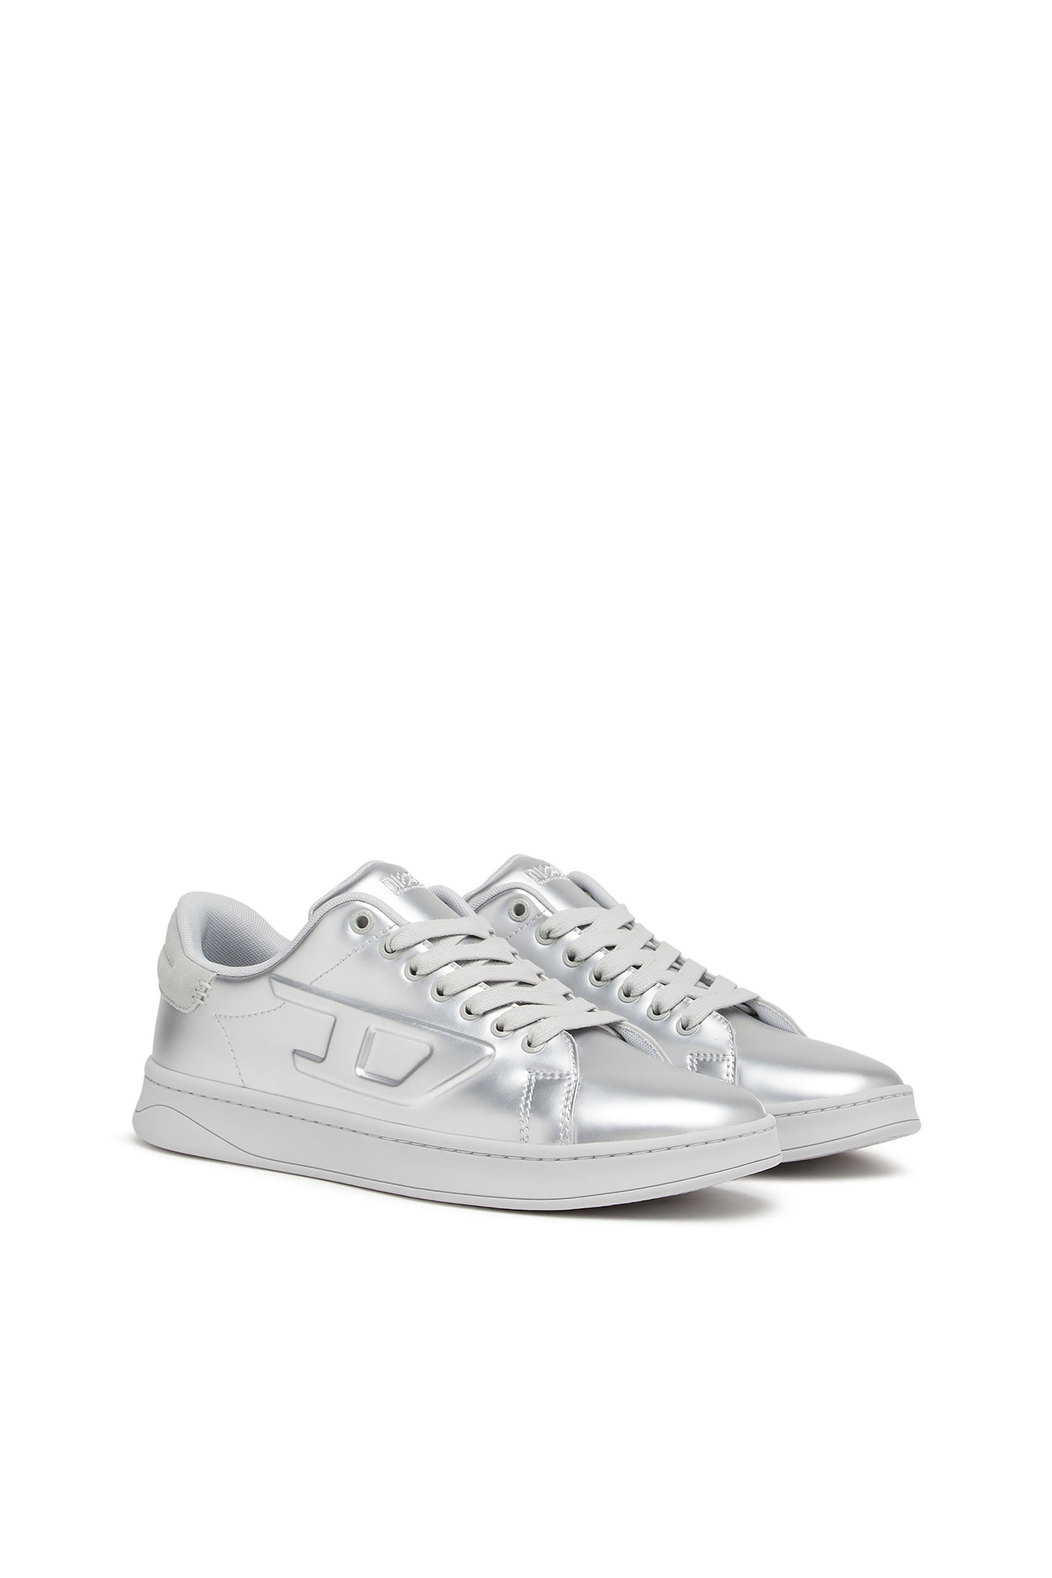 S-Athene Low - Metallic sneakers with embossed D logo